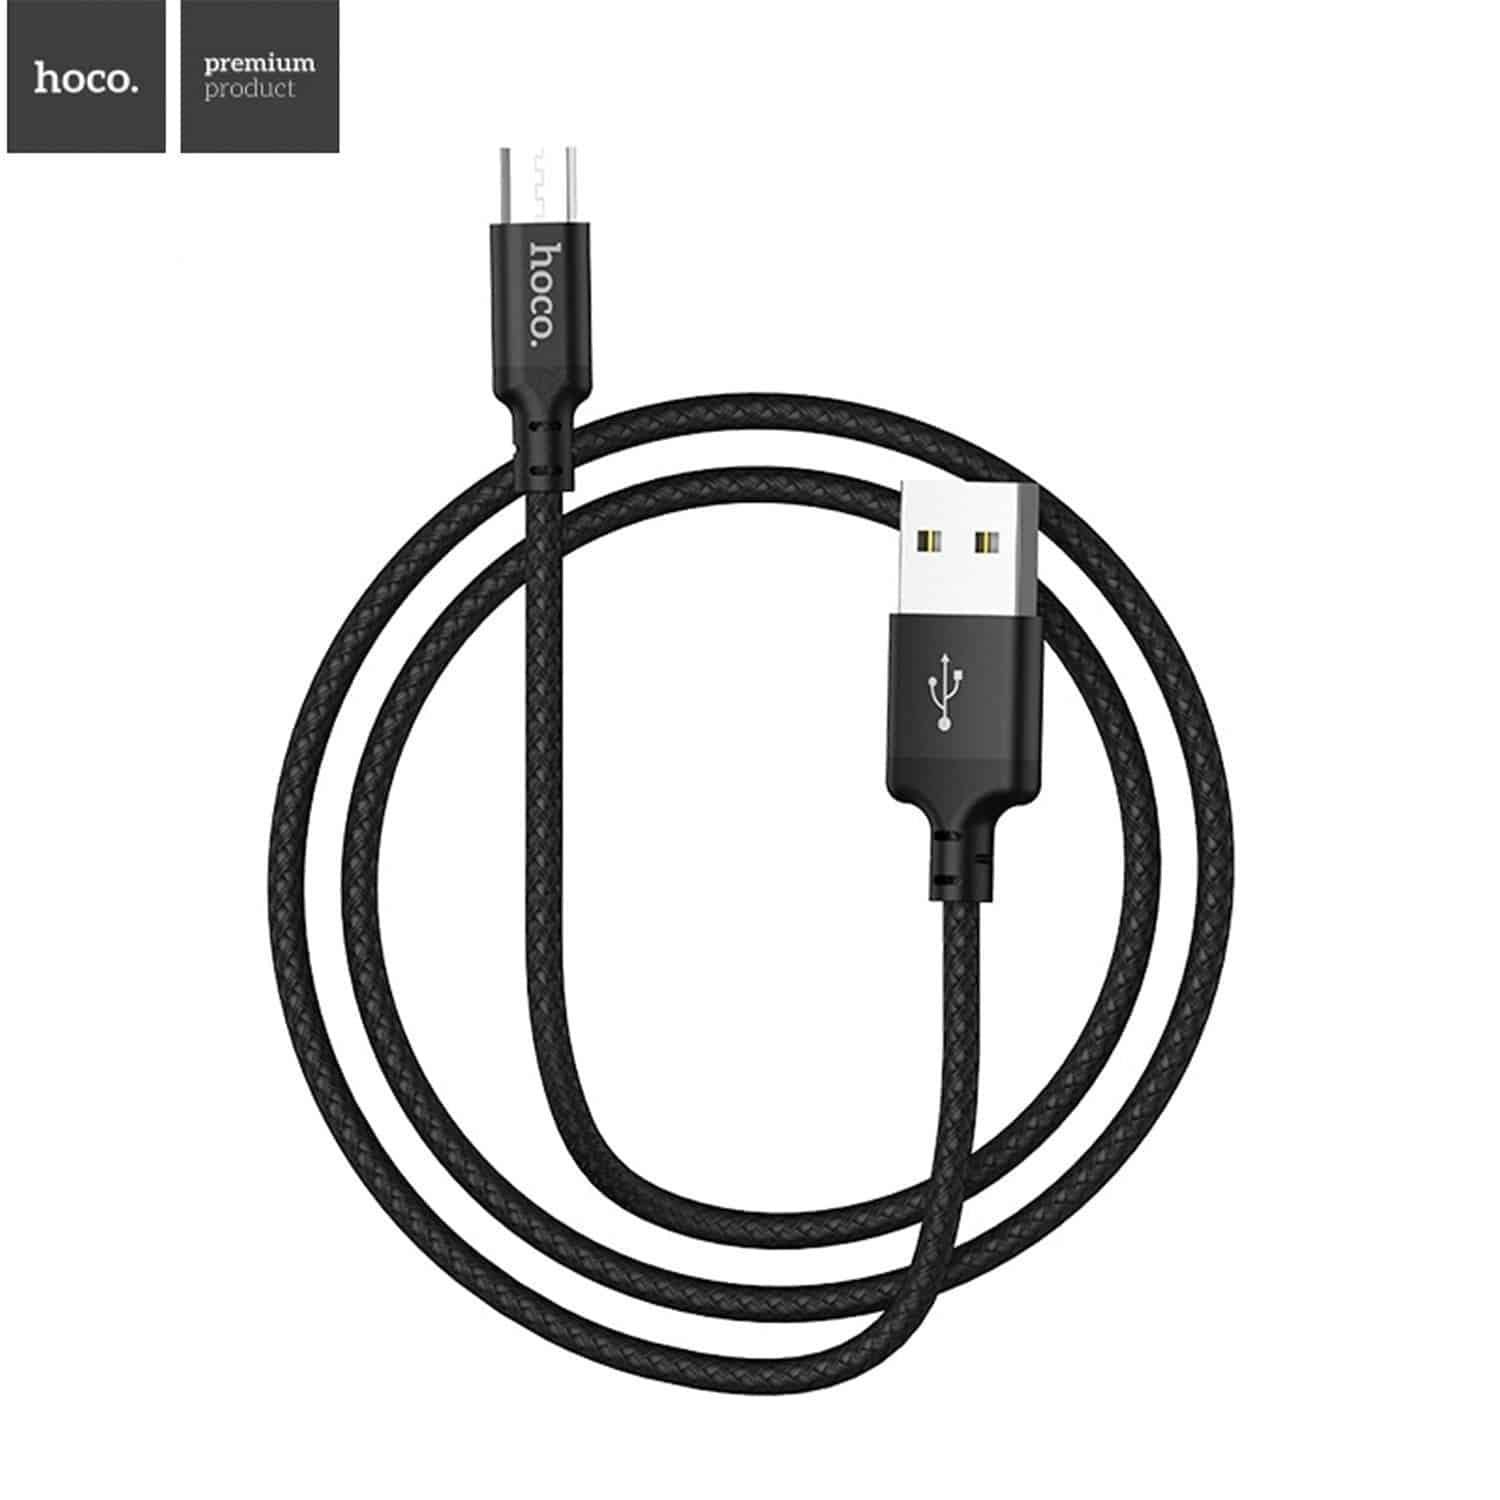 hoco. Cable «X14 Times speed» charging data Micro-USB | Shopna Online Store .